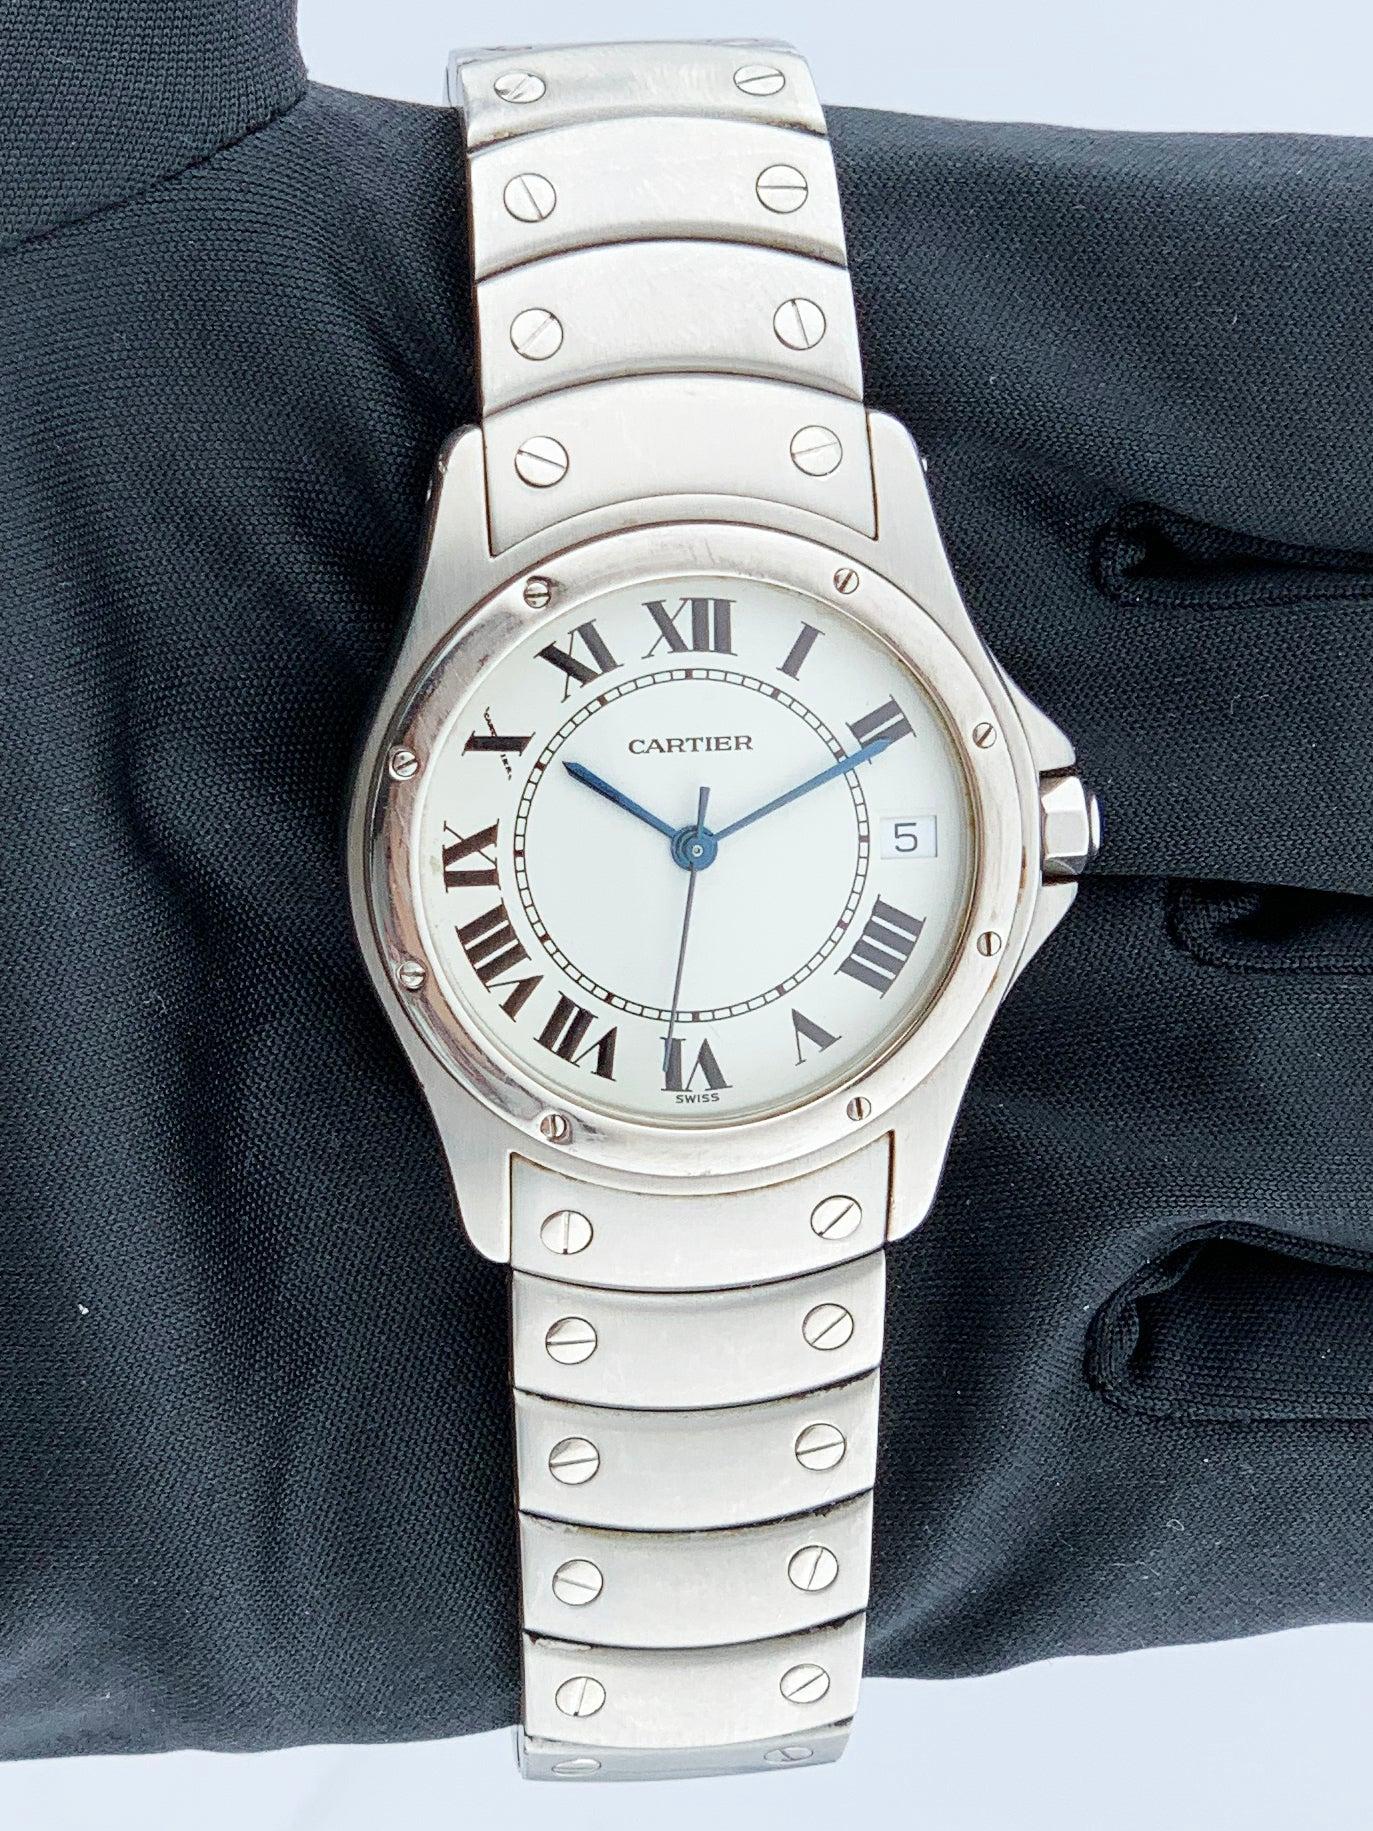 Cartier Cougar 1920/1 Mens Watch. 33mm Stainless steel case with stainless steel smooth bezel. White dial with Blue steel hands and Roman numeral hour markers.Minute markers on the inner dial. Date display at 3 o'clock position. Stainless